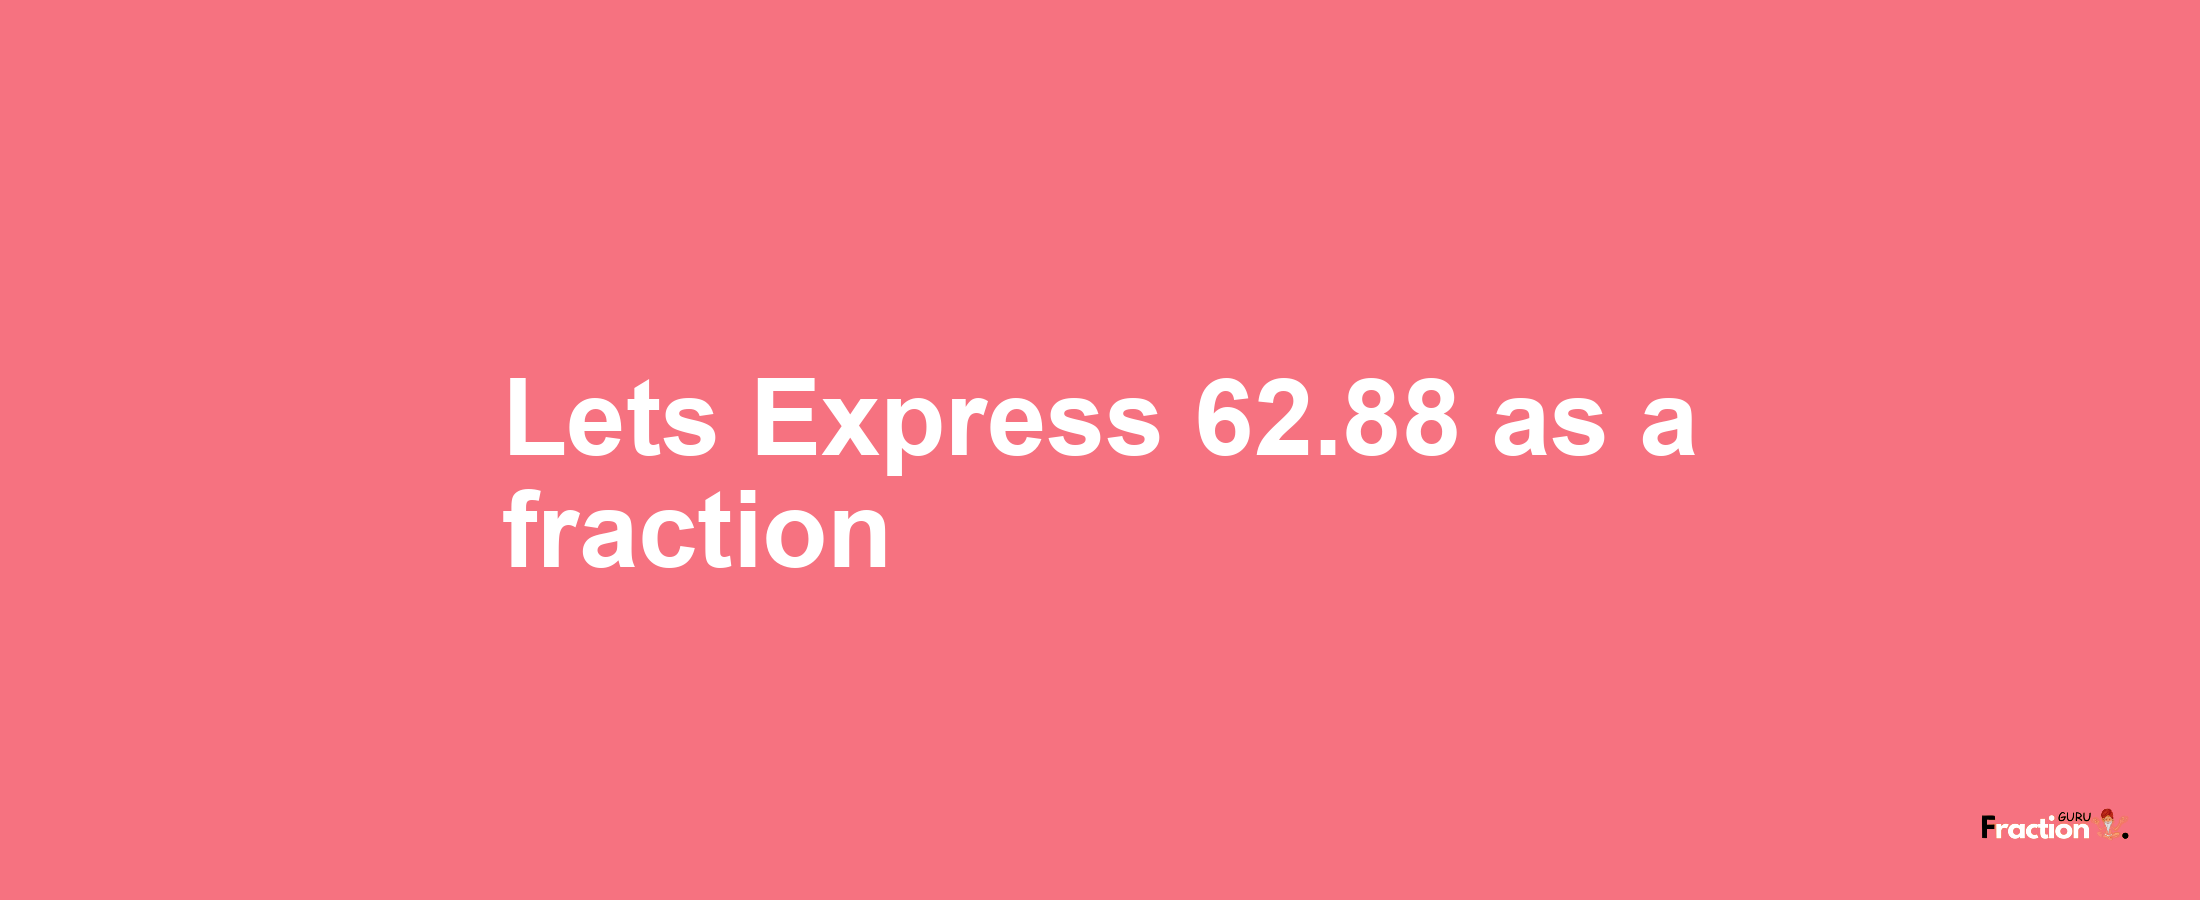 Lets Express 62.88 as afraction